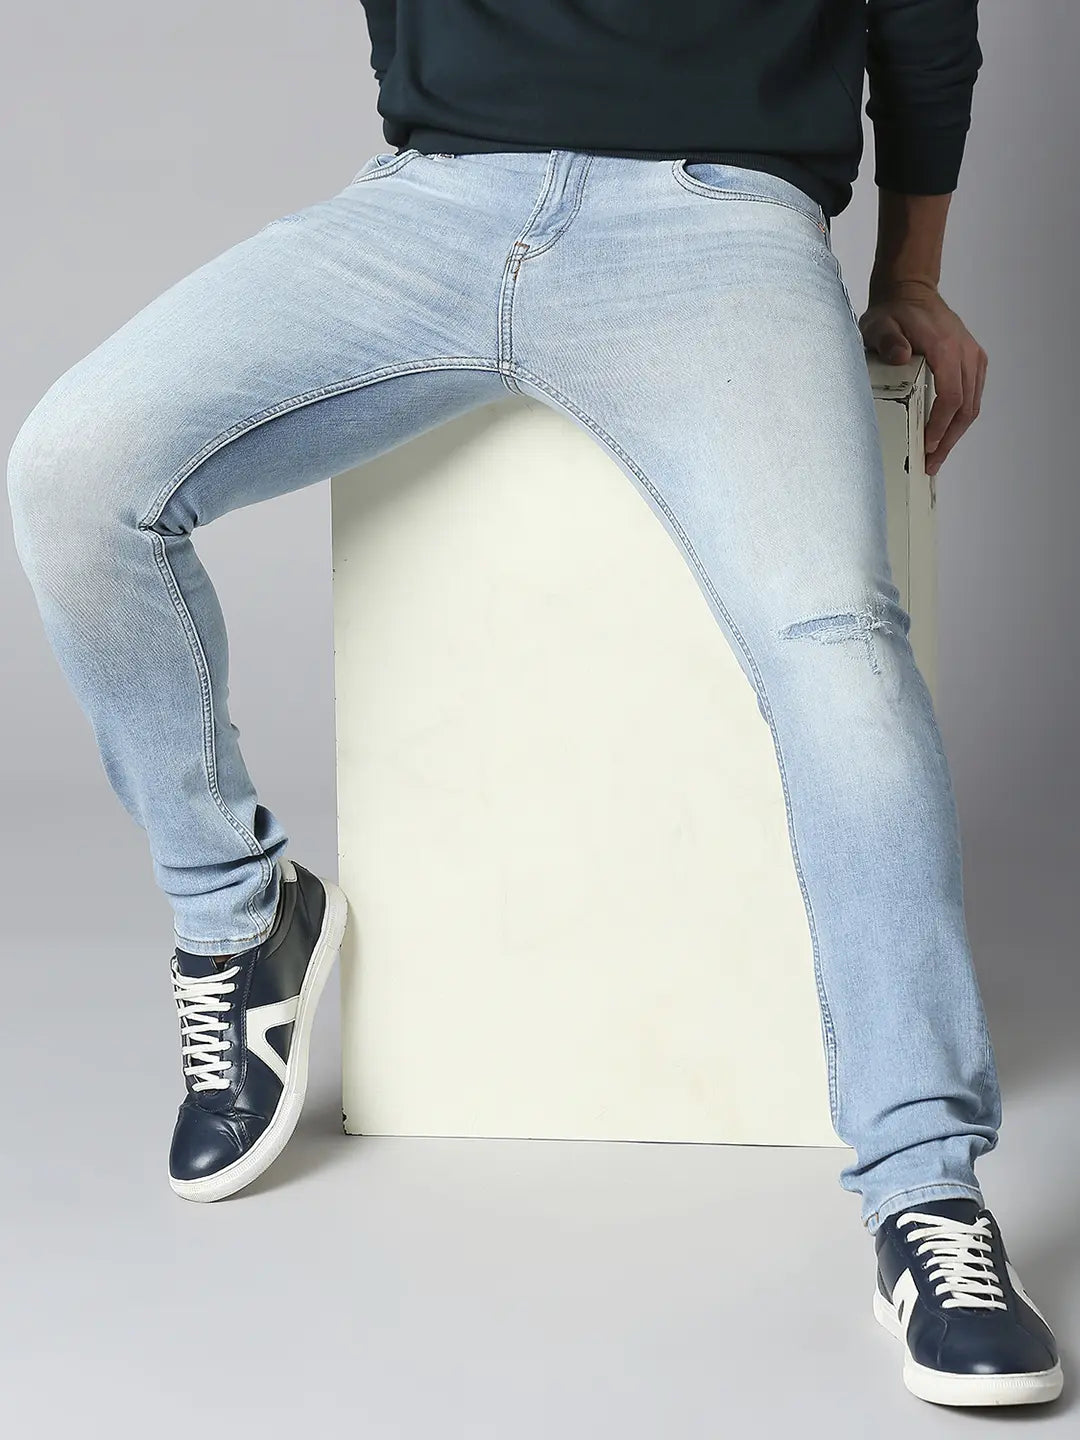 Buy Blue Jeans for Men by French Connection Online | Ajio.com